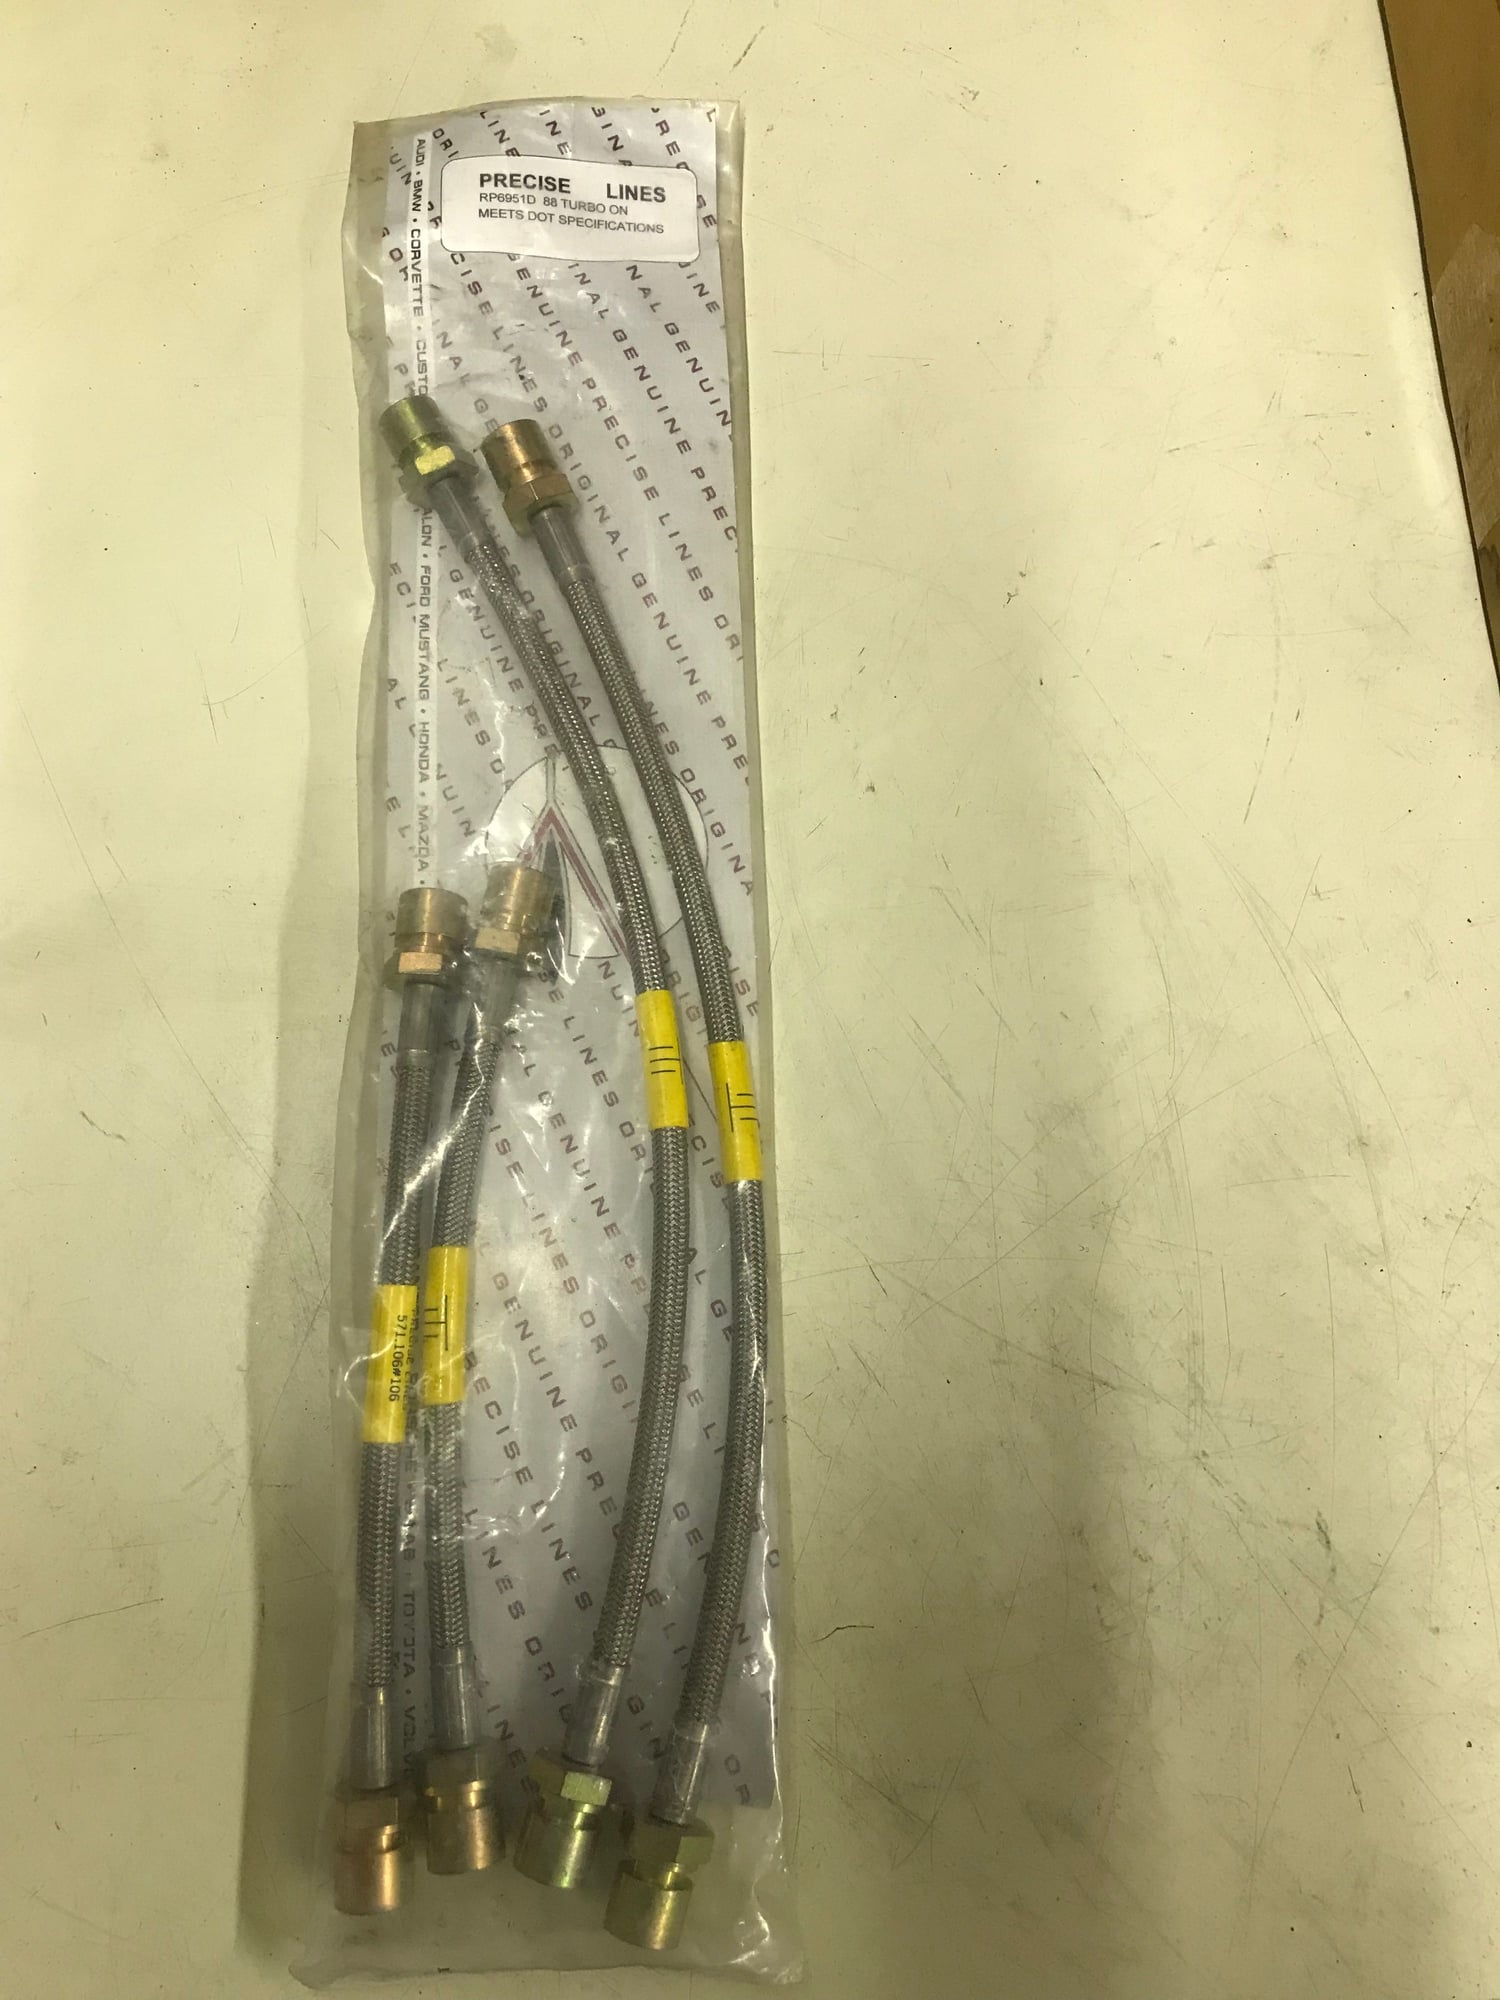 Brakes - Braided stainless steel brake line set for 944 Turbo S - New - 1988 to 1989 Porsche 944 - Naperville, IL 60565, United States